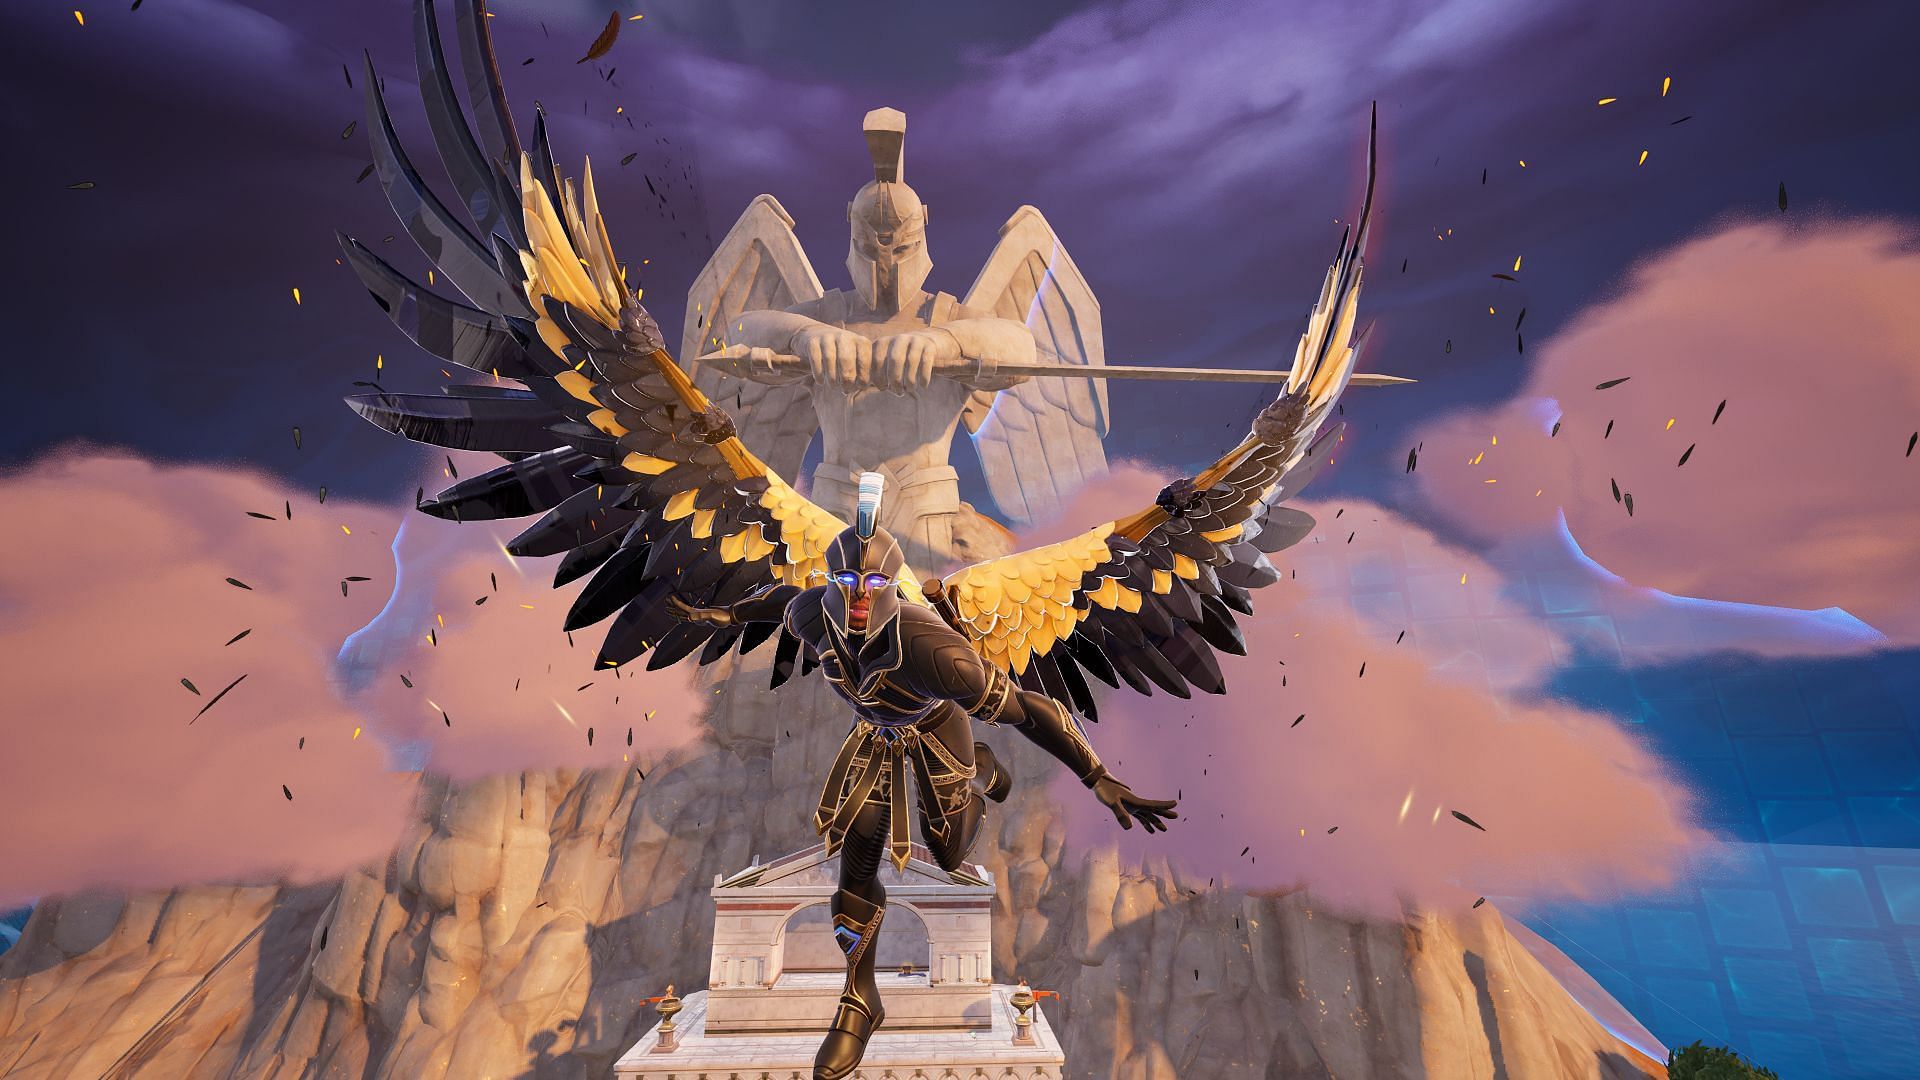 Fortnite visual glitch turns Wings of Icarus invisible, players seemingly fly effortlessly  (Image via Epic Games/Fortnite)